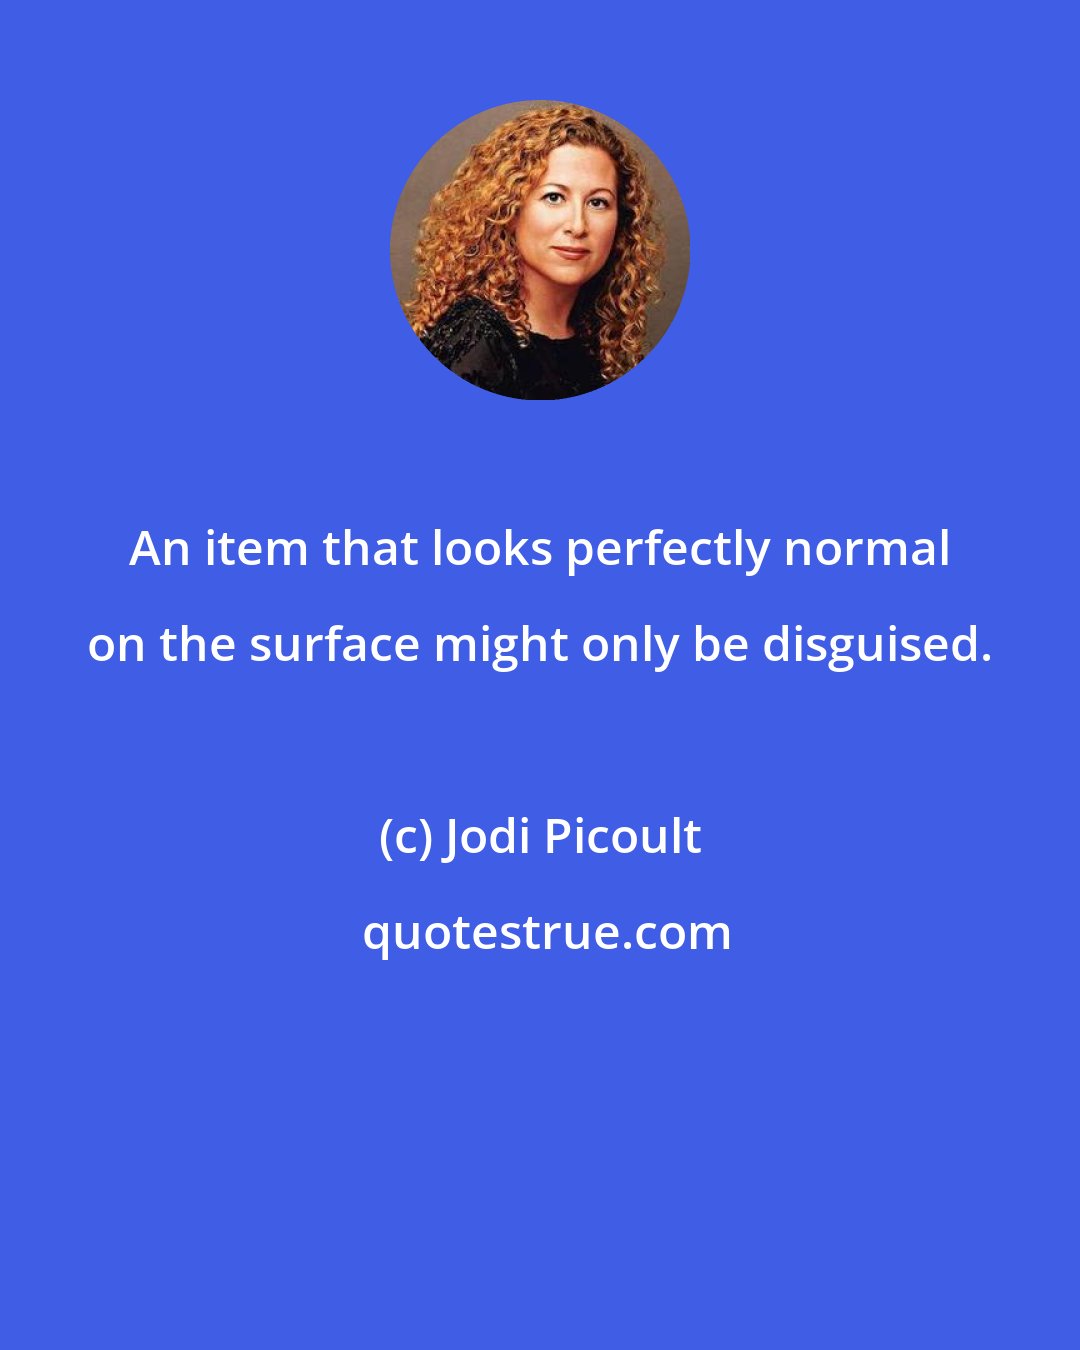 Jodi Picoult: An item that looks perfectly normal on the surface might only be disguised.